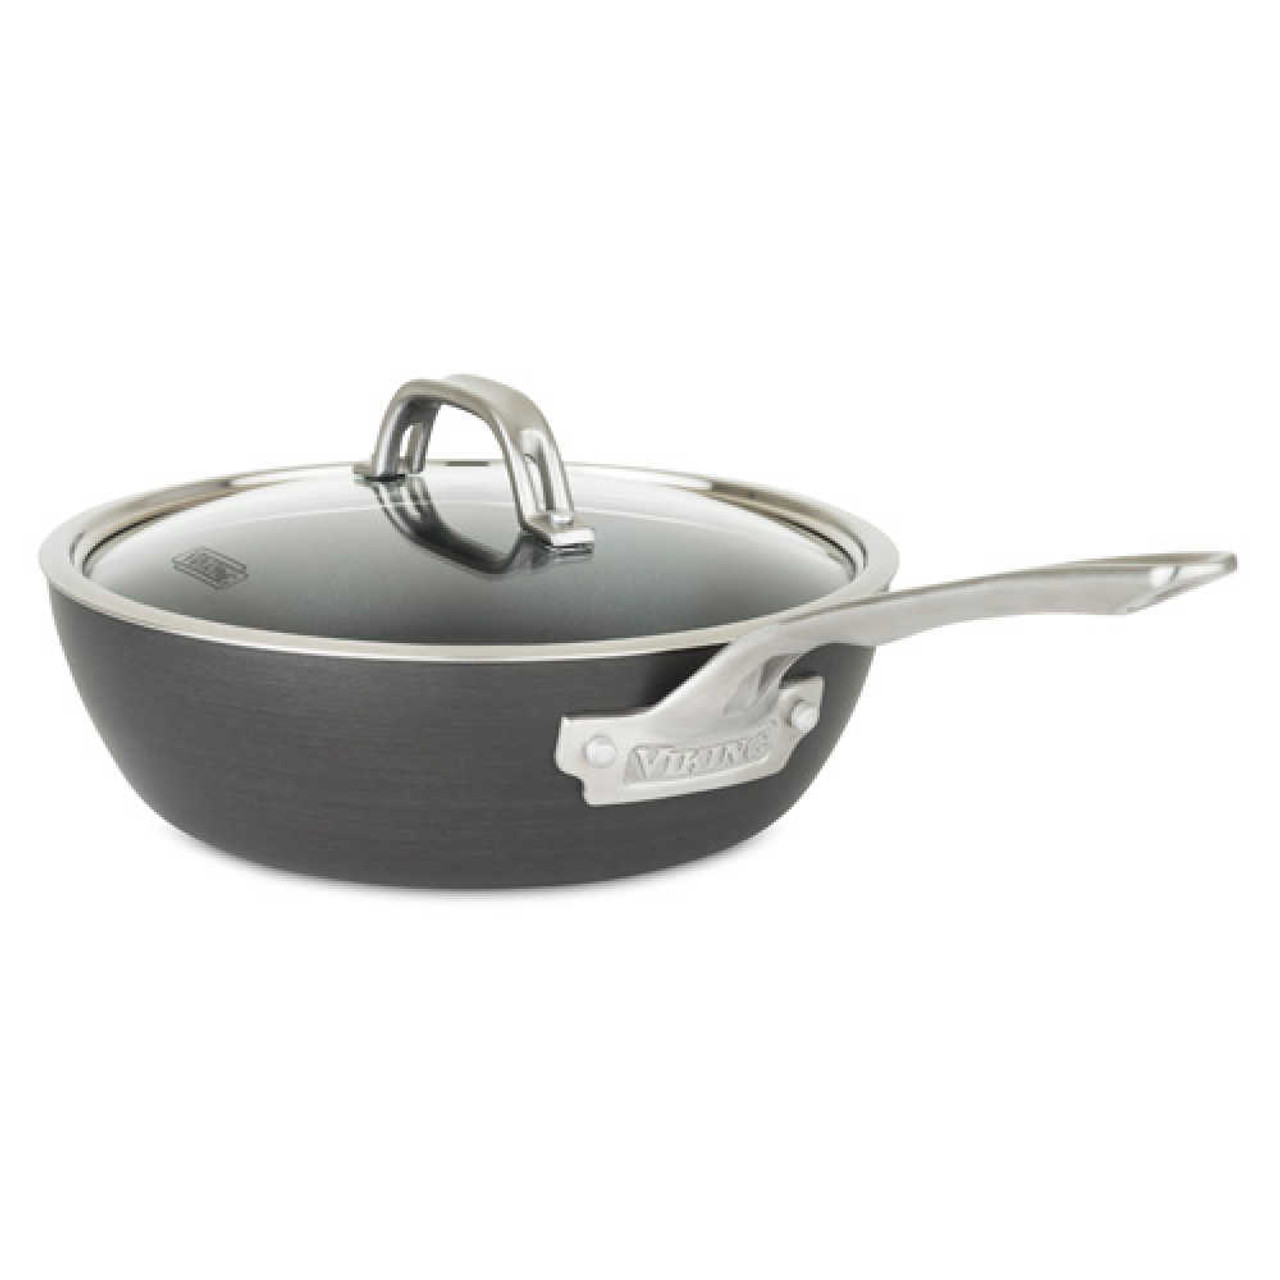 https://cdn11.bigcommerce.com/s-hccytny0od/images/stencil/1280x1280/products/4818/19683/Viking_Hard_Anodized_Nonstick_Saucier__14379.1656108318.jpg?c=2?imbypass=on